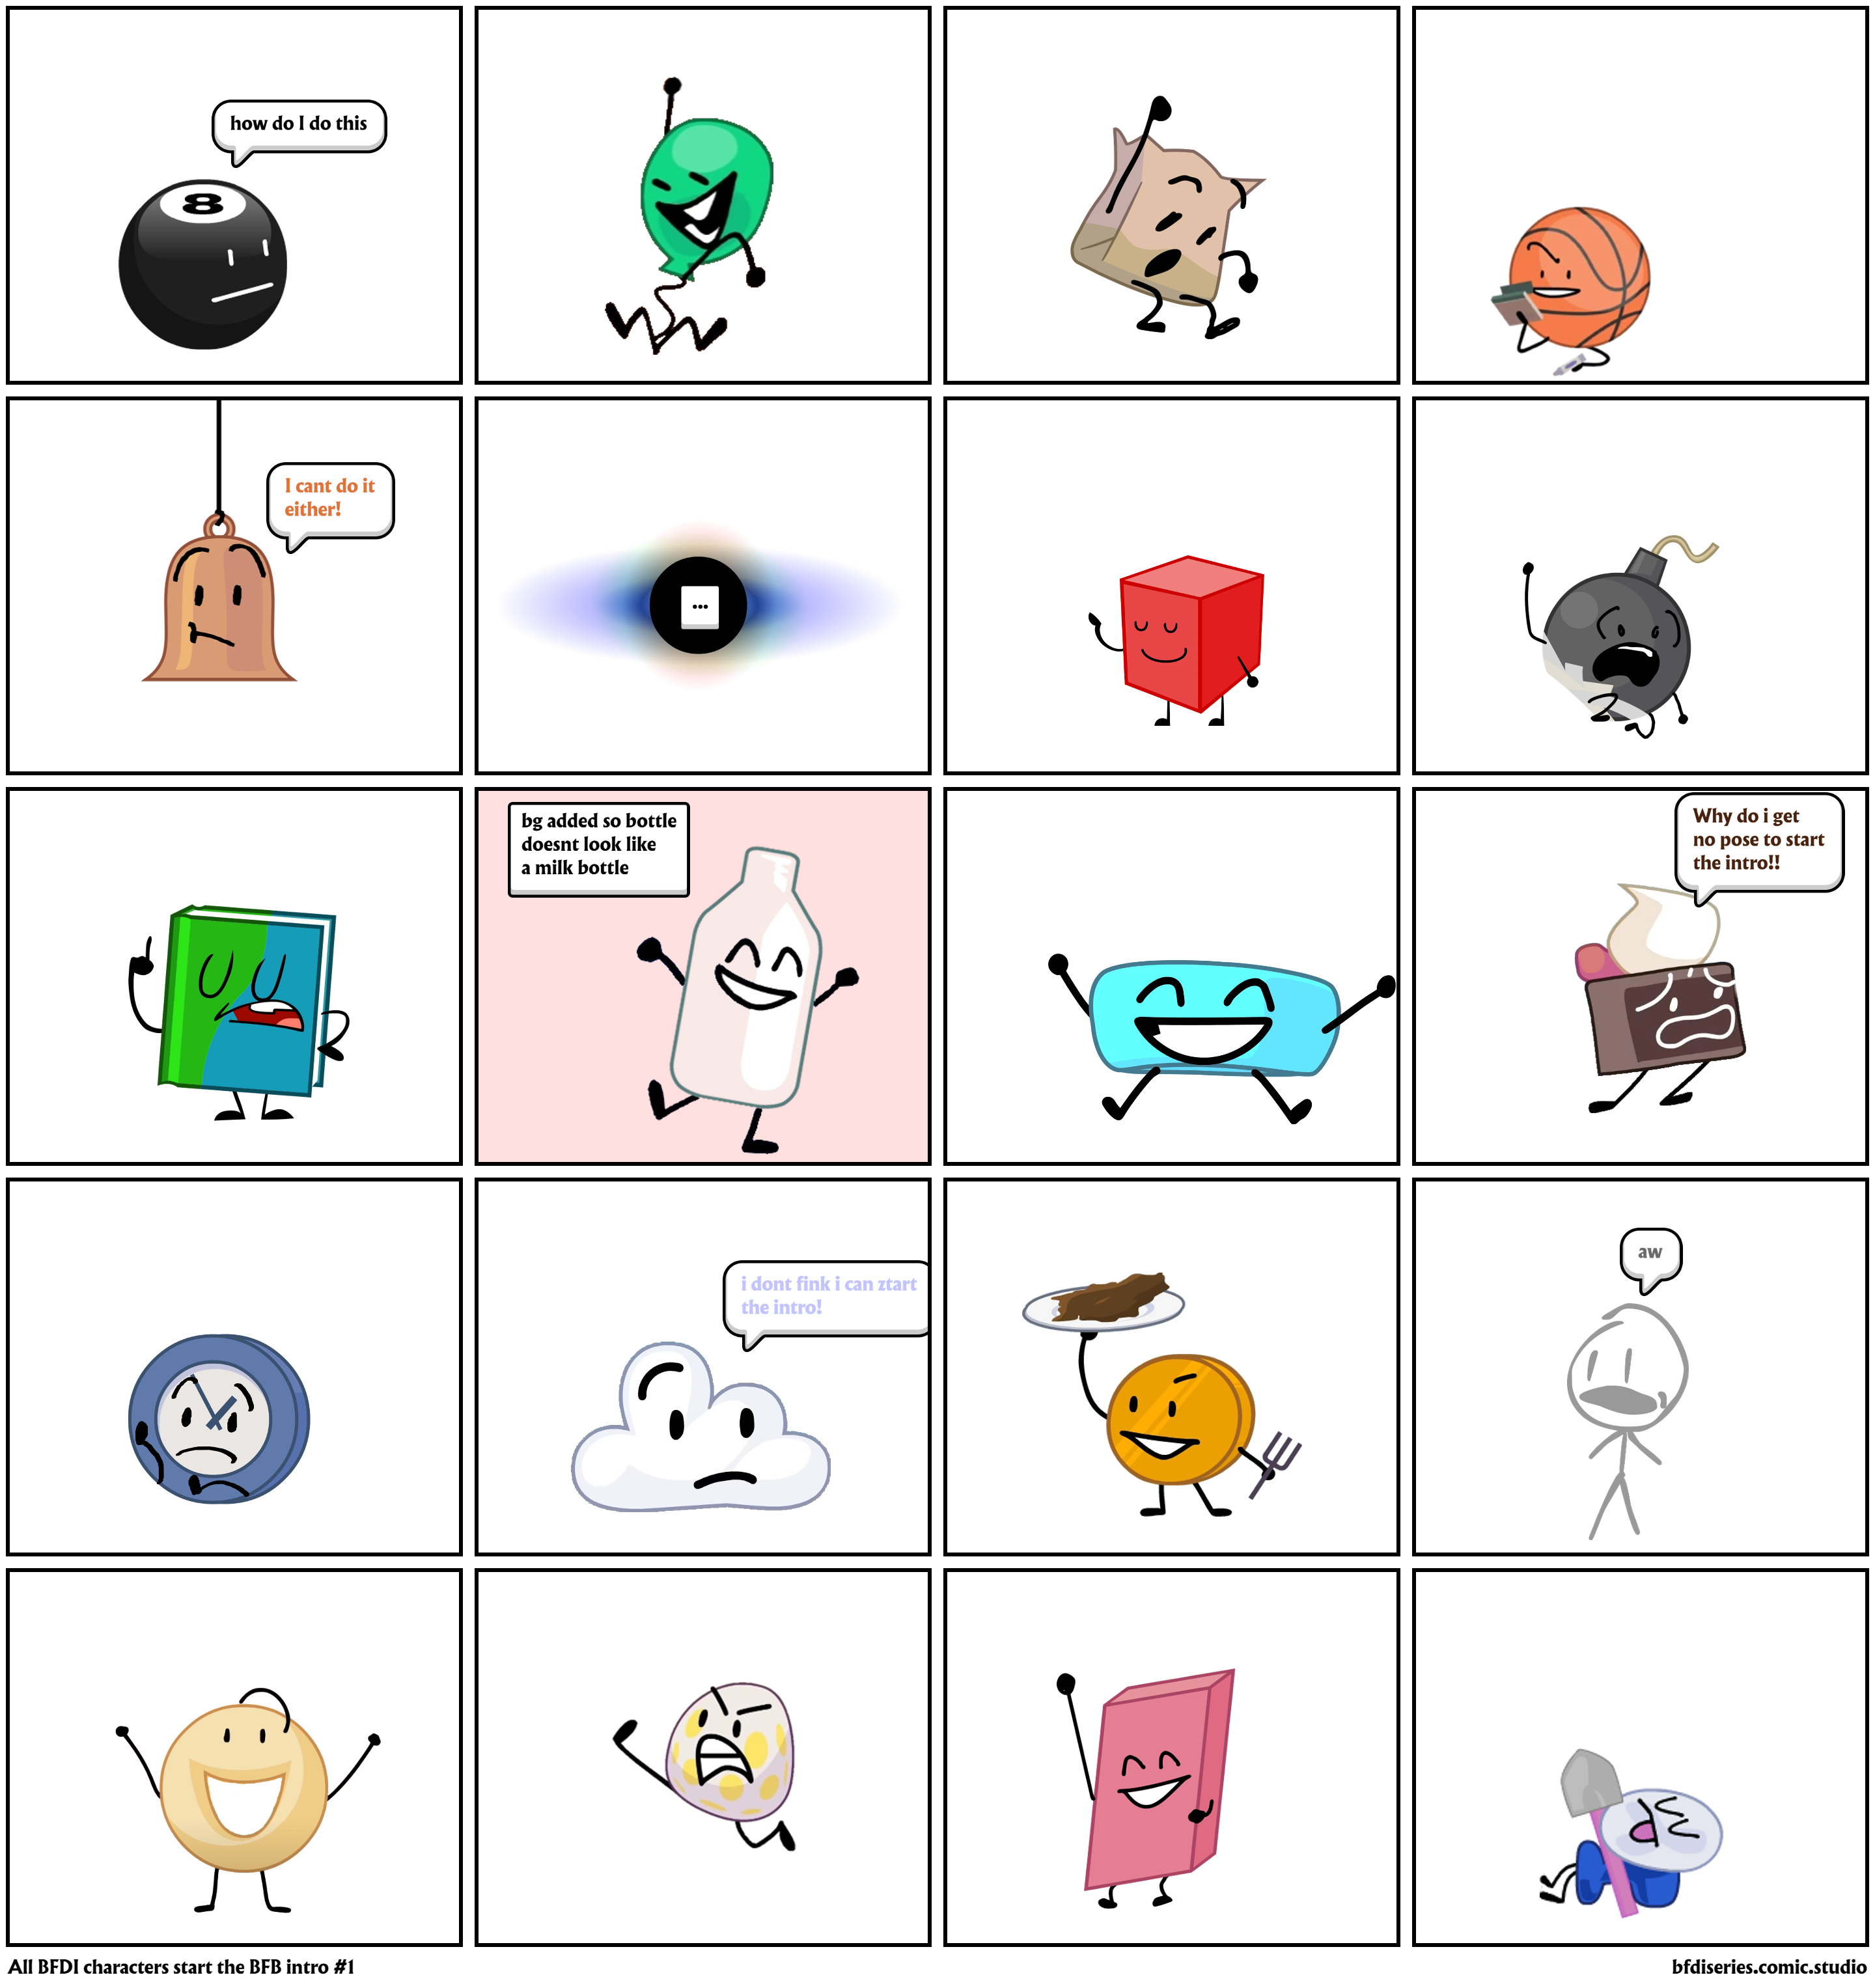 All BFDI characters start the BFB intro #1